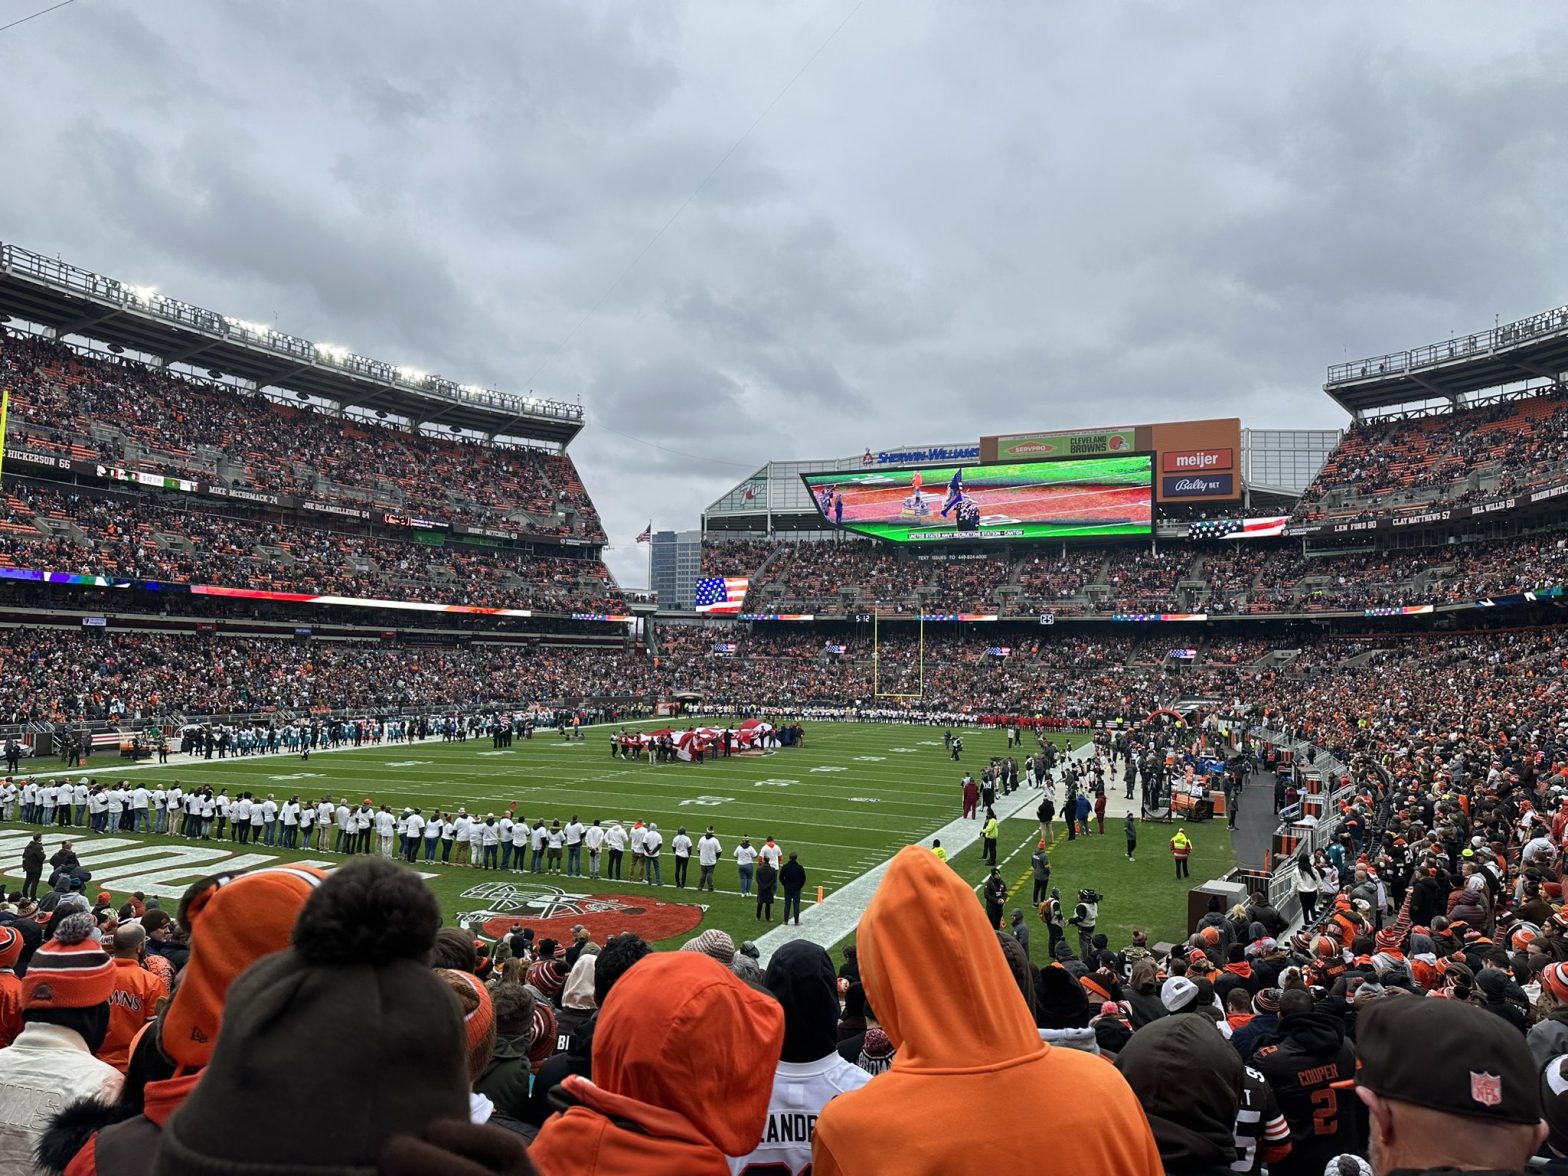 Cleveland Browns vs Chicago Bears weather forecast: Will it rain at Cleveland Browns Stadium?